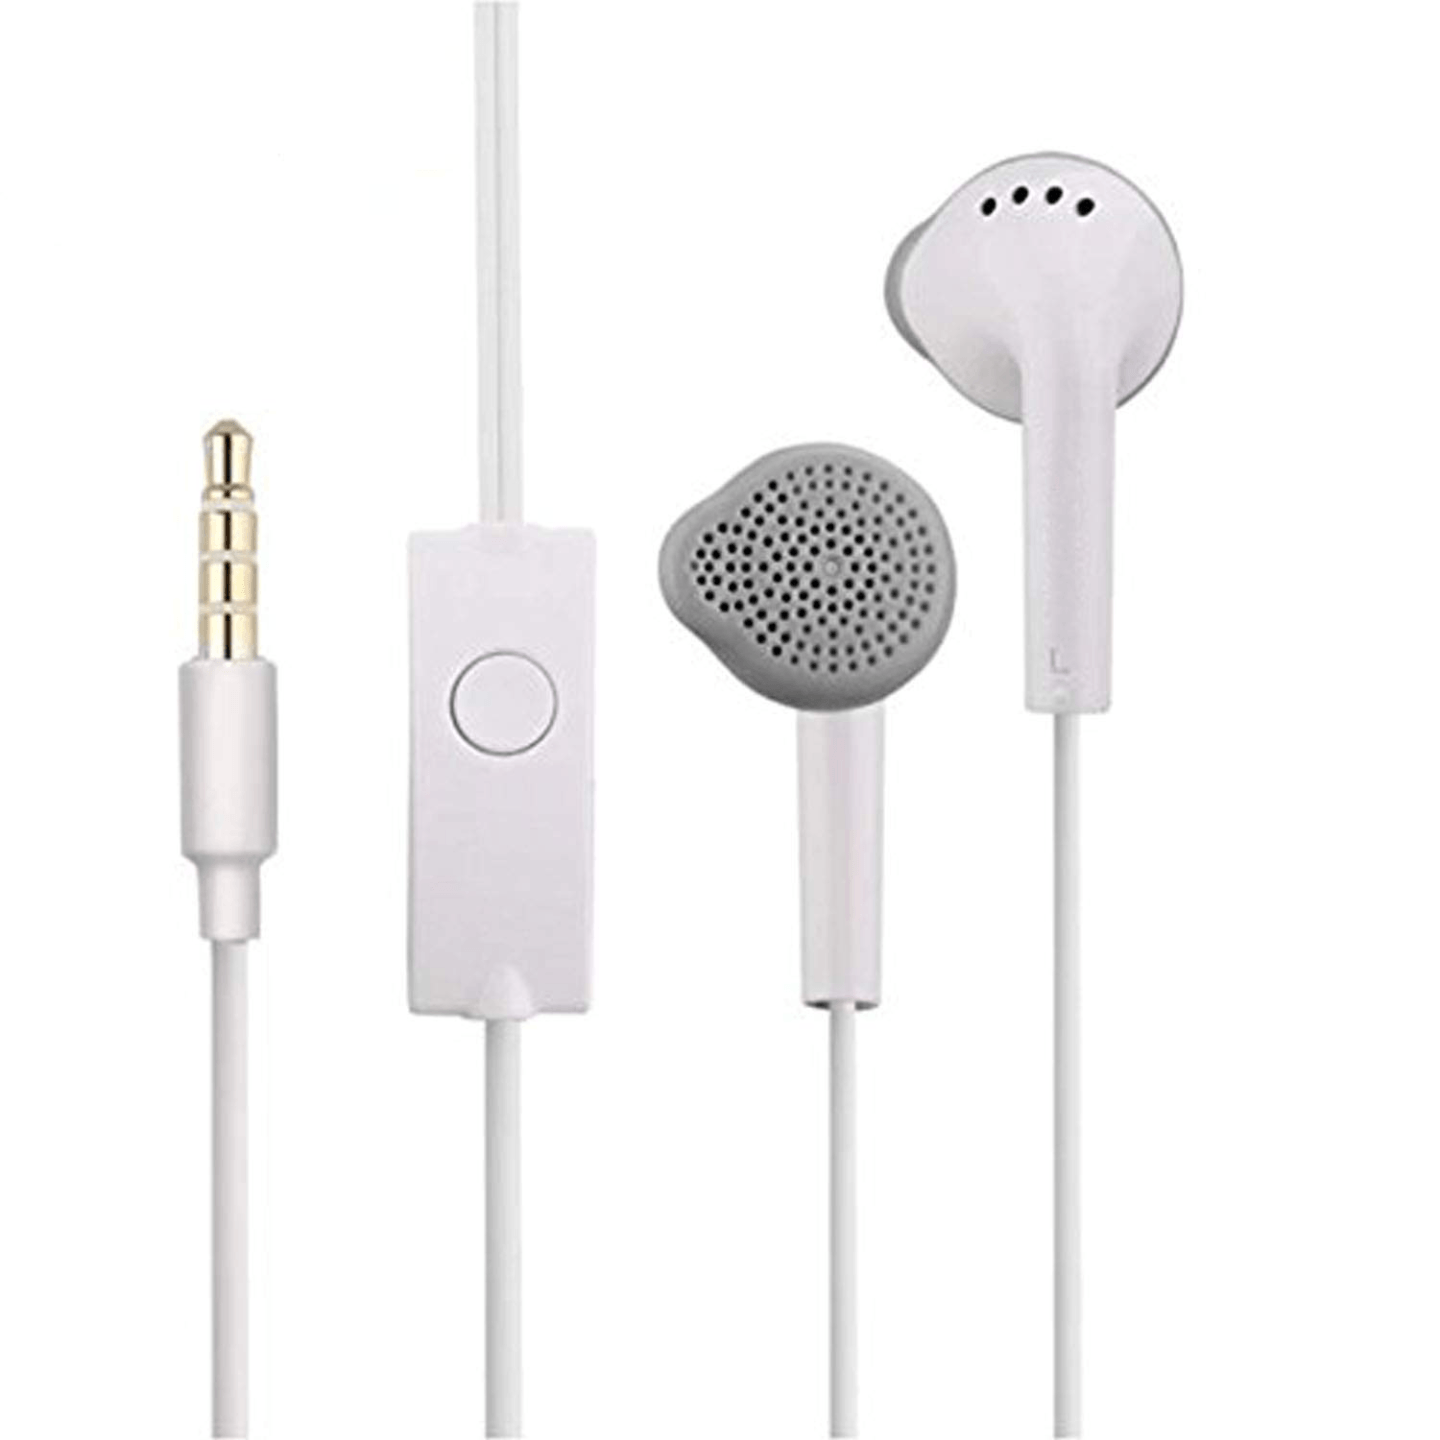 Earphone for Samsung Galaxy On7 Universal Wired Stereo Bass Head Hands-Free Headsets Earbuds with Mic, Calling 3.5mm Jack Best Sound Earphones Compatible with All Andriod Smartphone, White